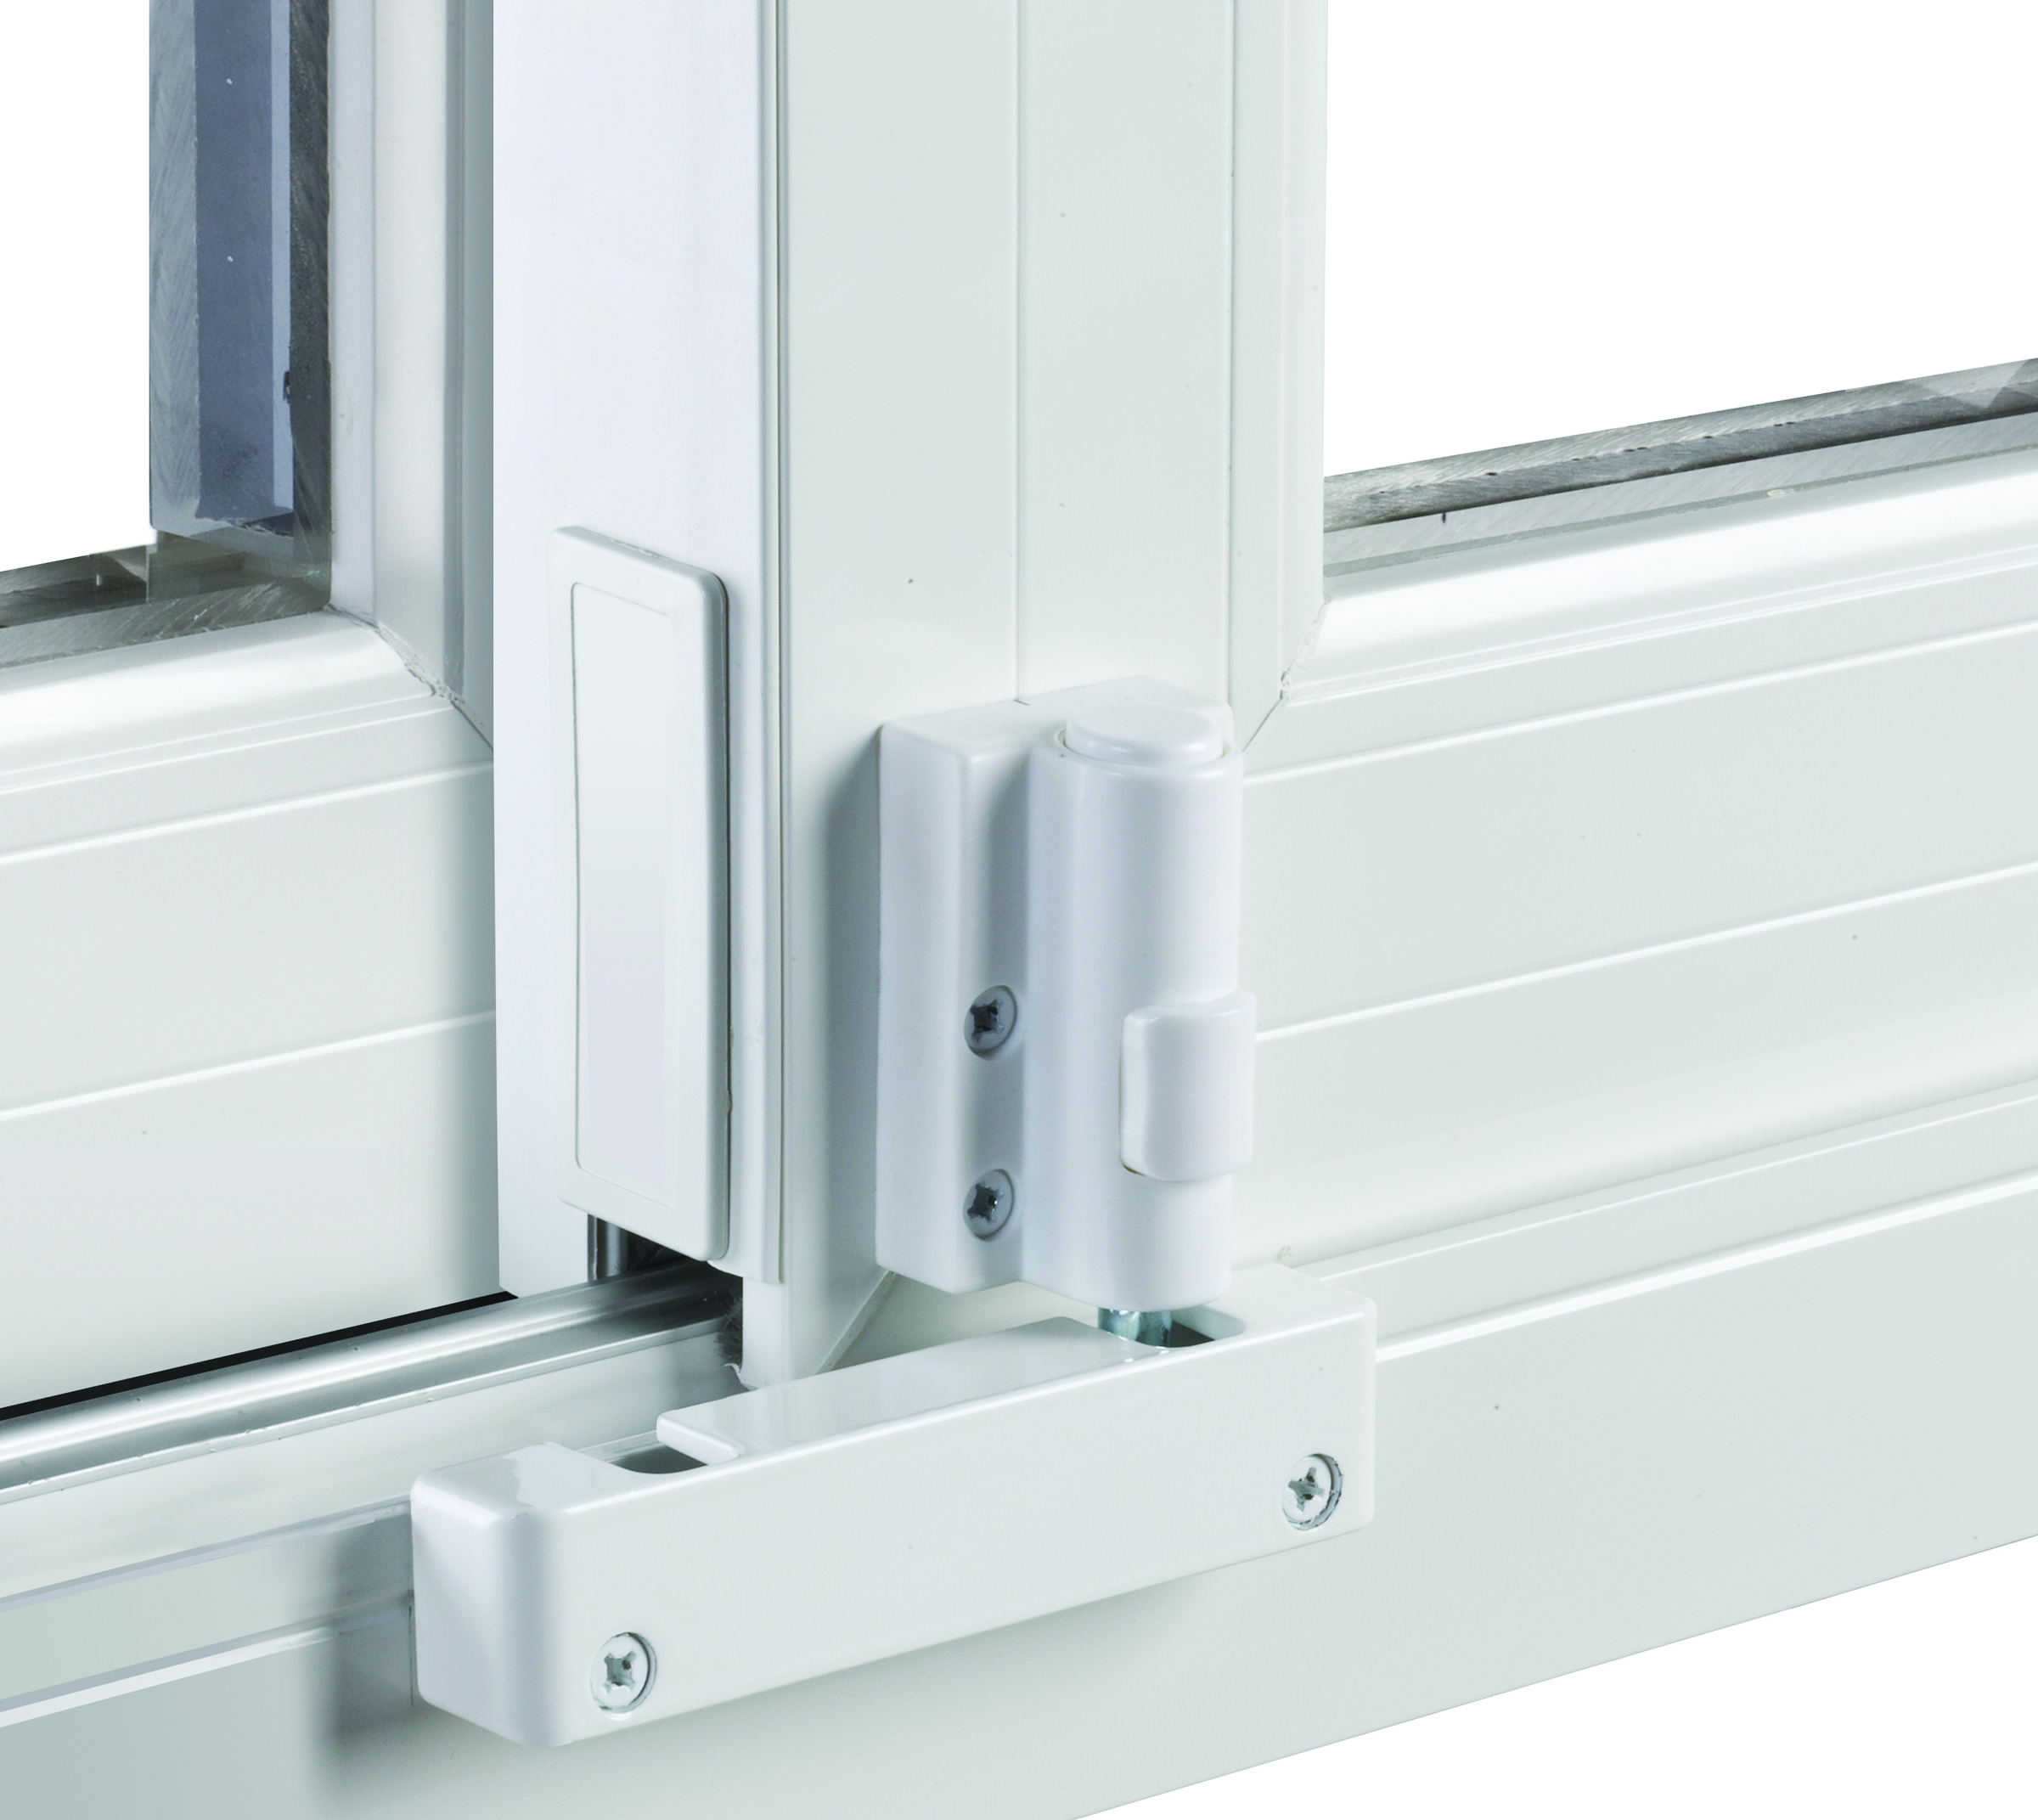 Safety latches on windows and doors, like this patio door foot lock, is another way to safeguard children and pets.